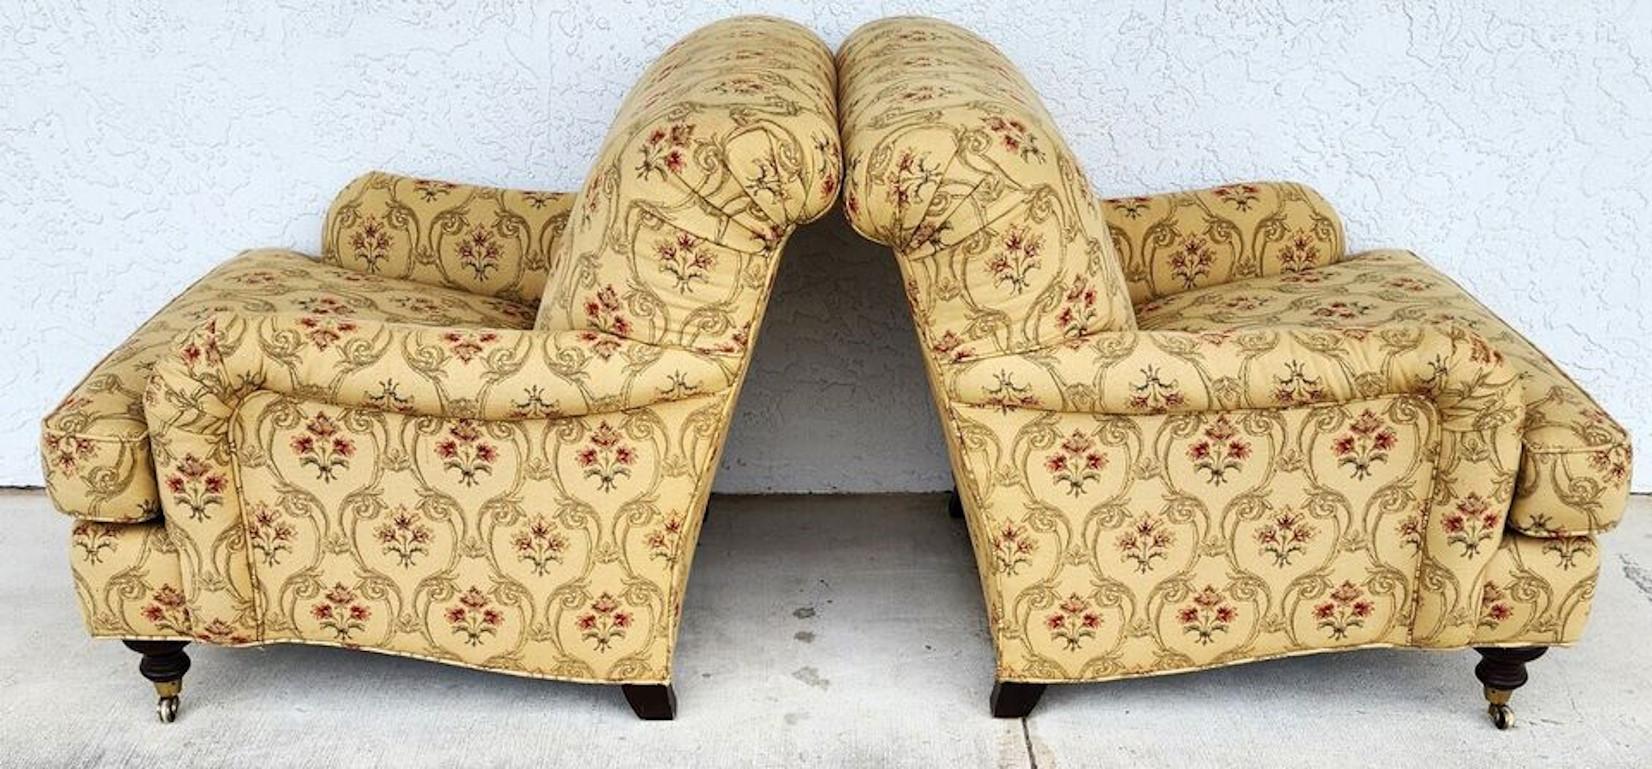 For FULL item description click on CONTINUE READING at the bottom of this page.

Offering One Of Our Recent Palm Beach Estate Fine Furniture Acquisitions Of A
Pair of DREXEL Upholstery Collection English Style Club Lounge Chairs with front casters